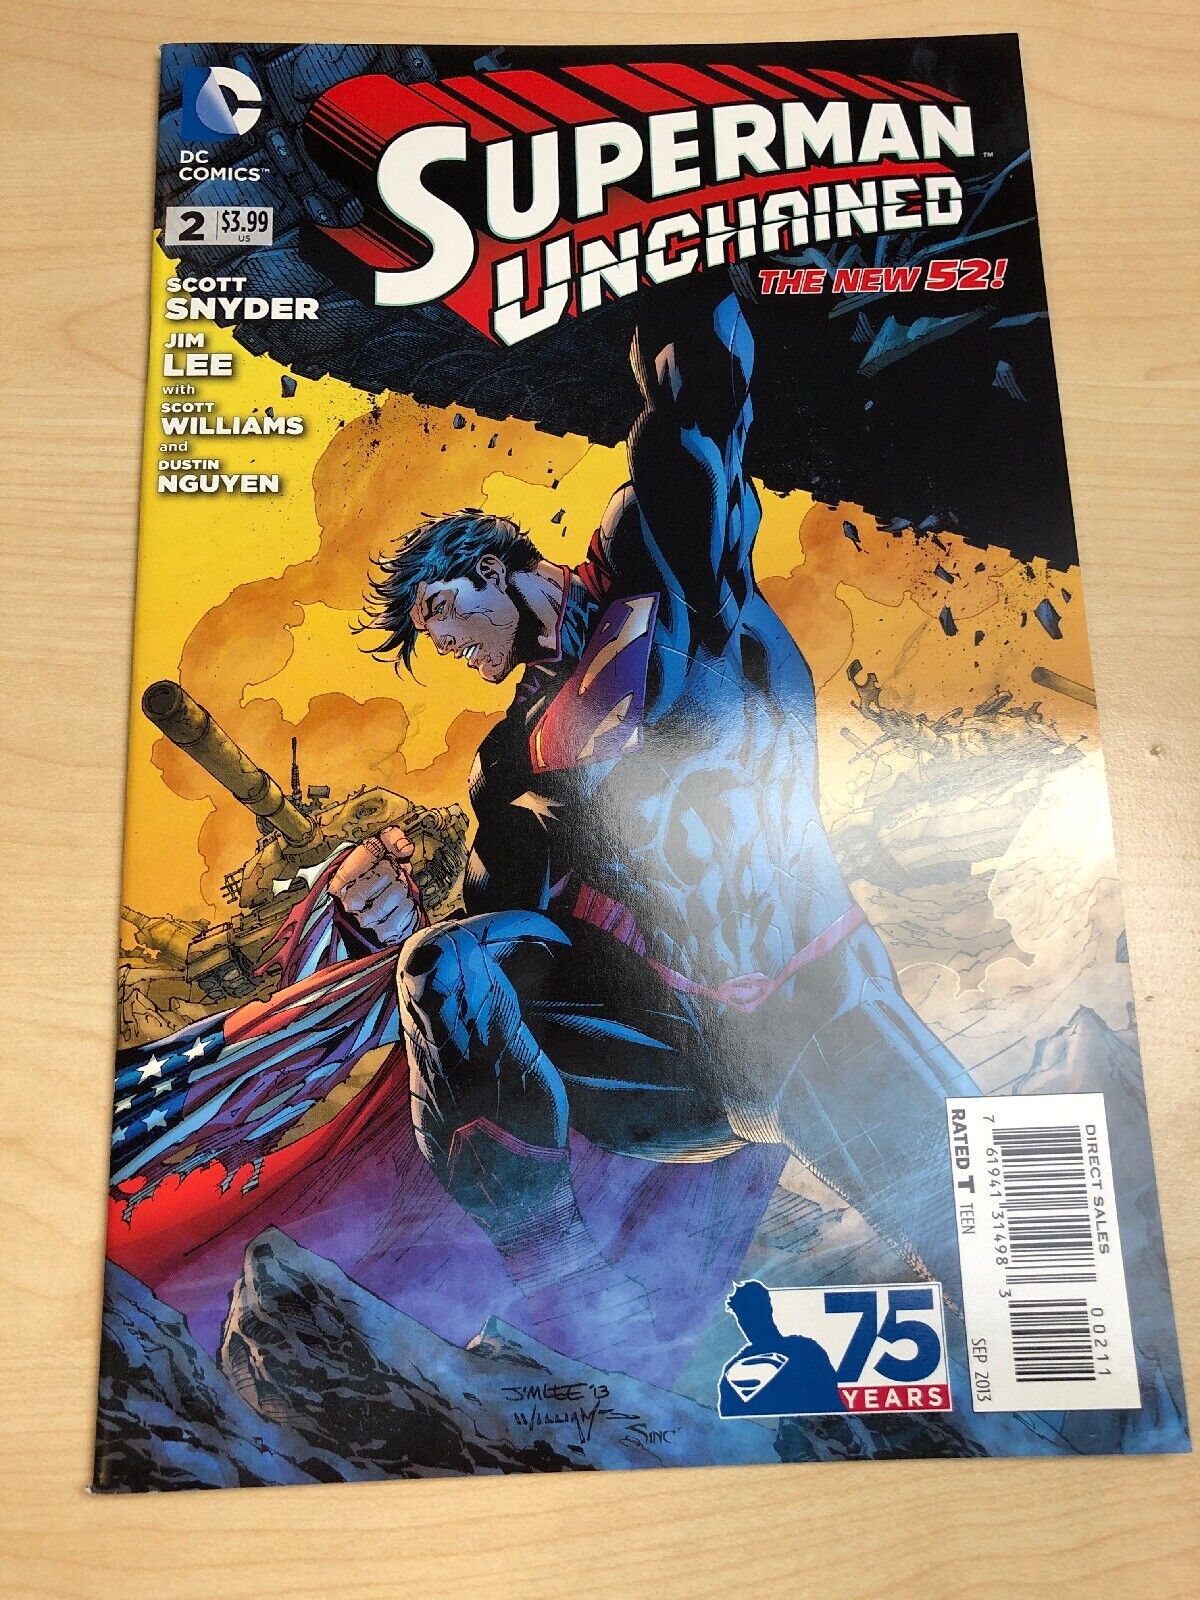 Superman Unchained #2 (September 2013, DC)